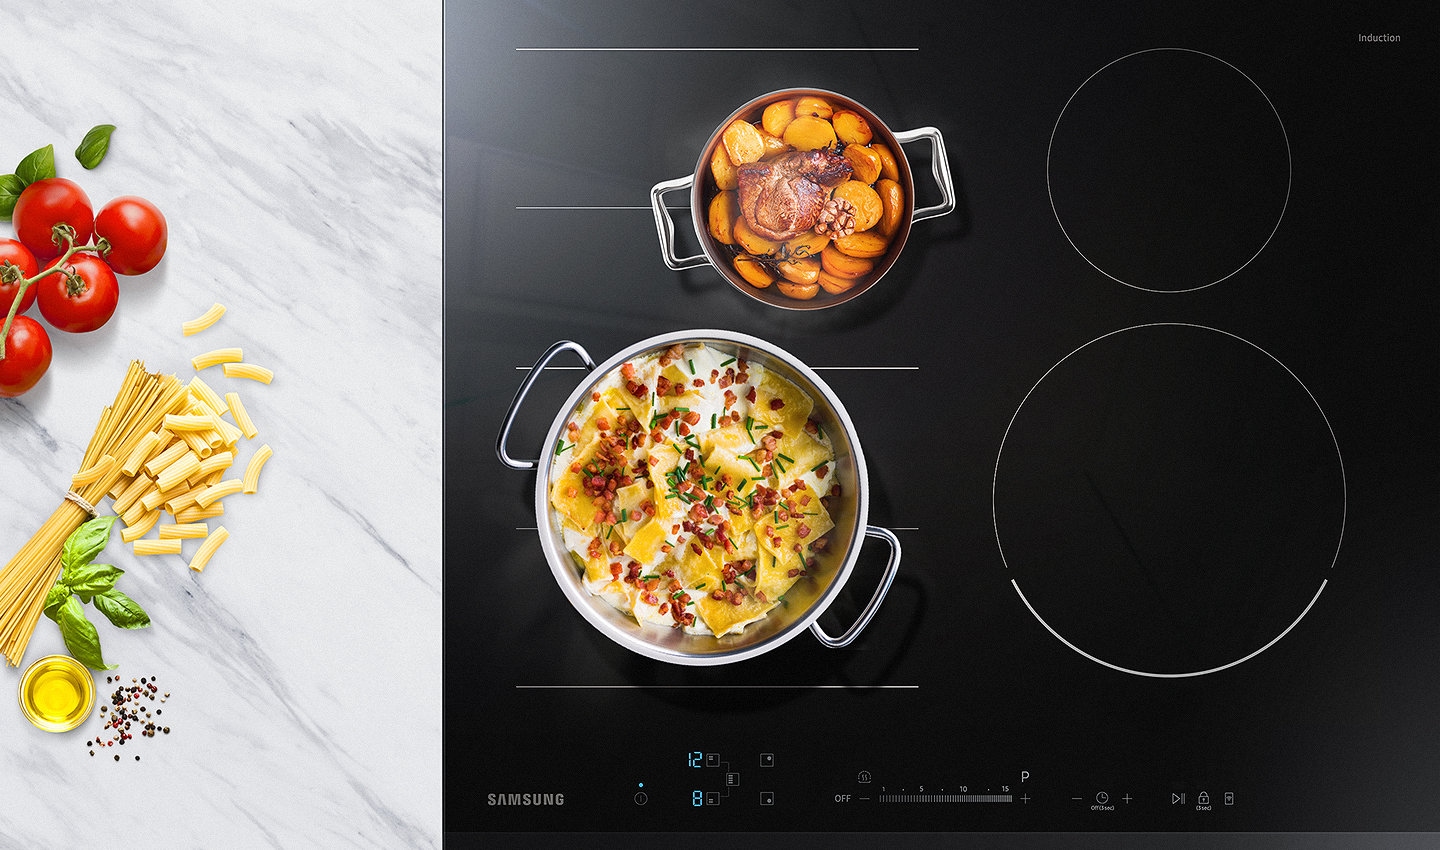 Flexibly cook even more dishes together